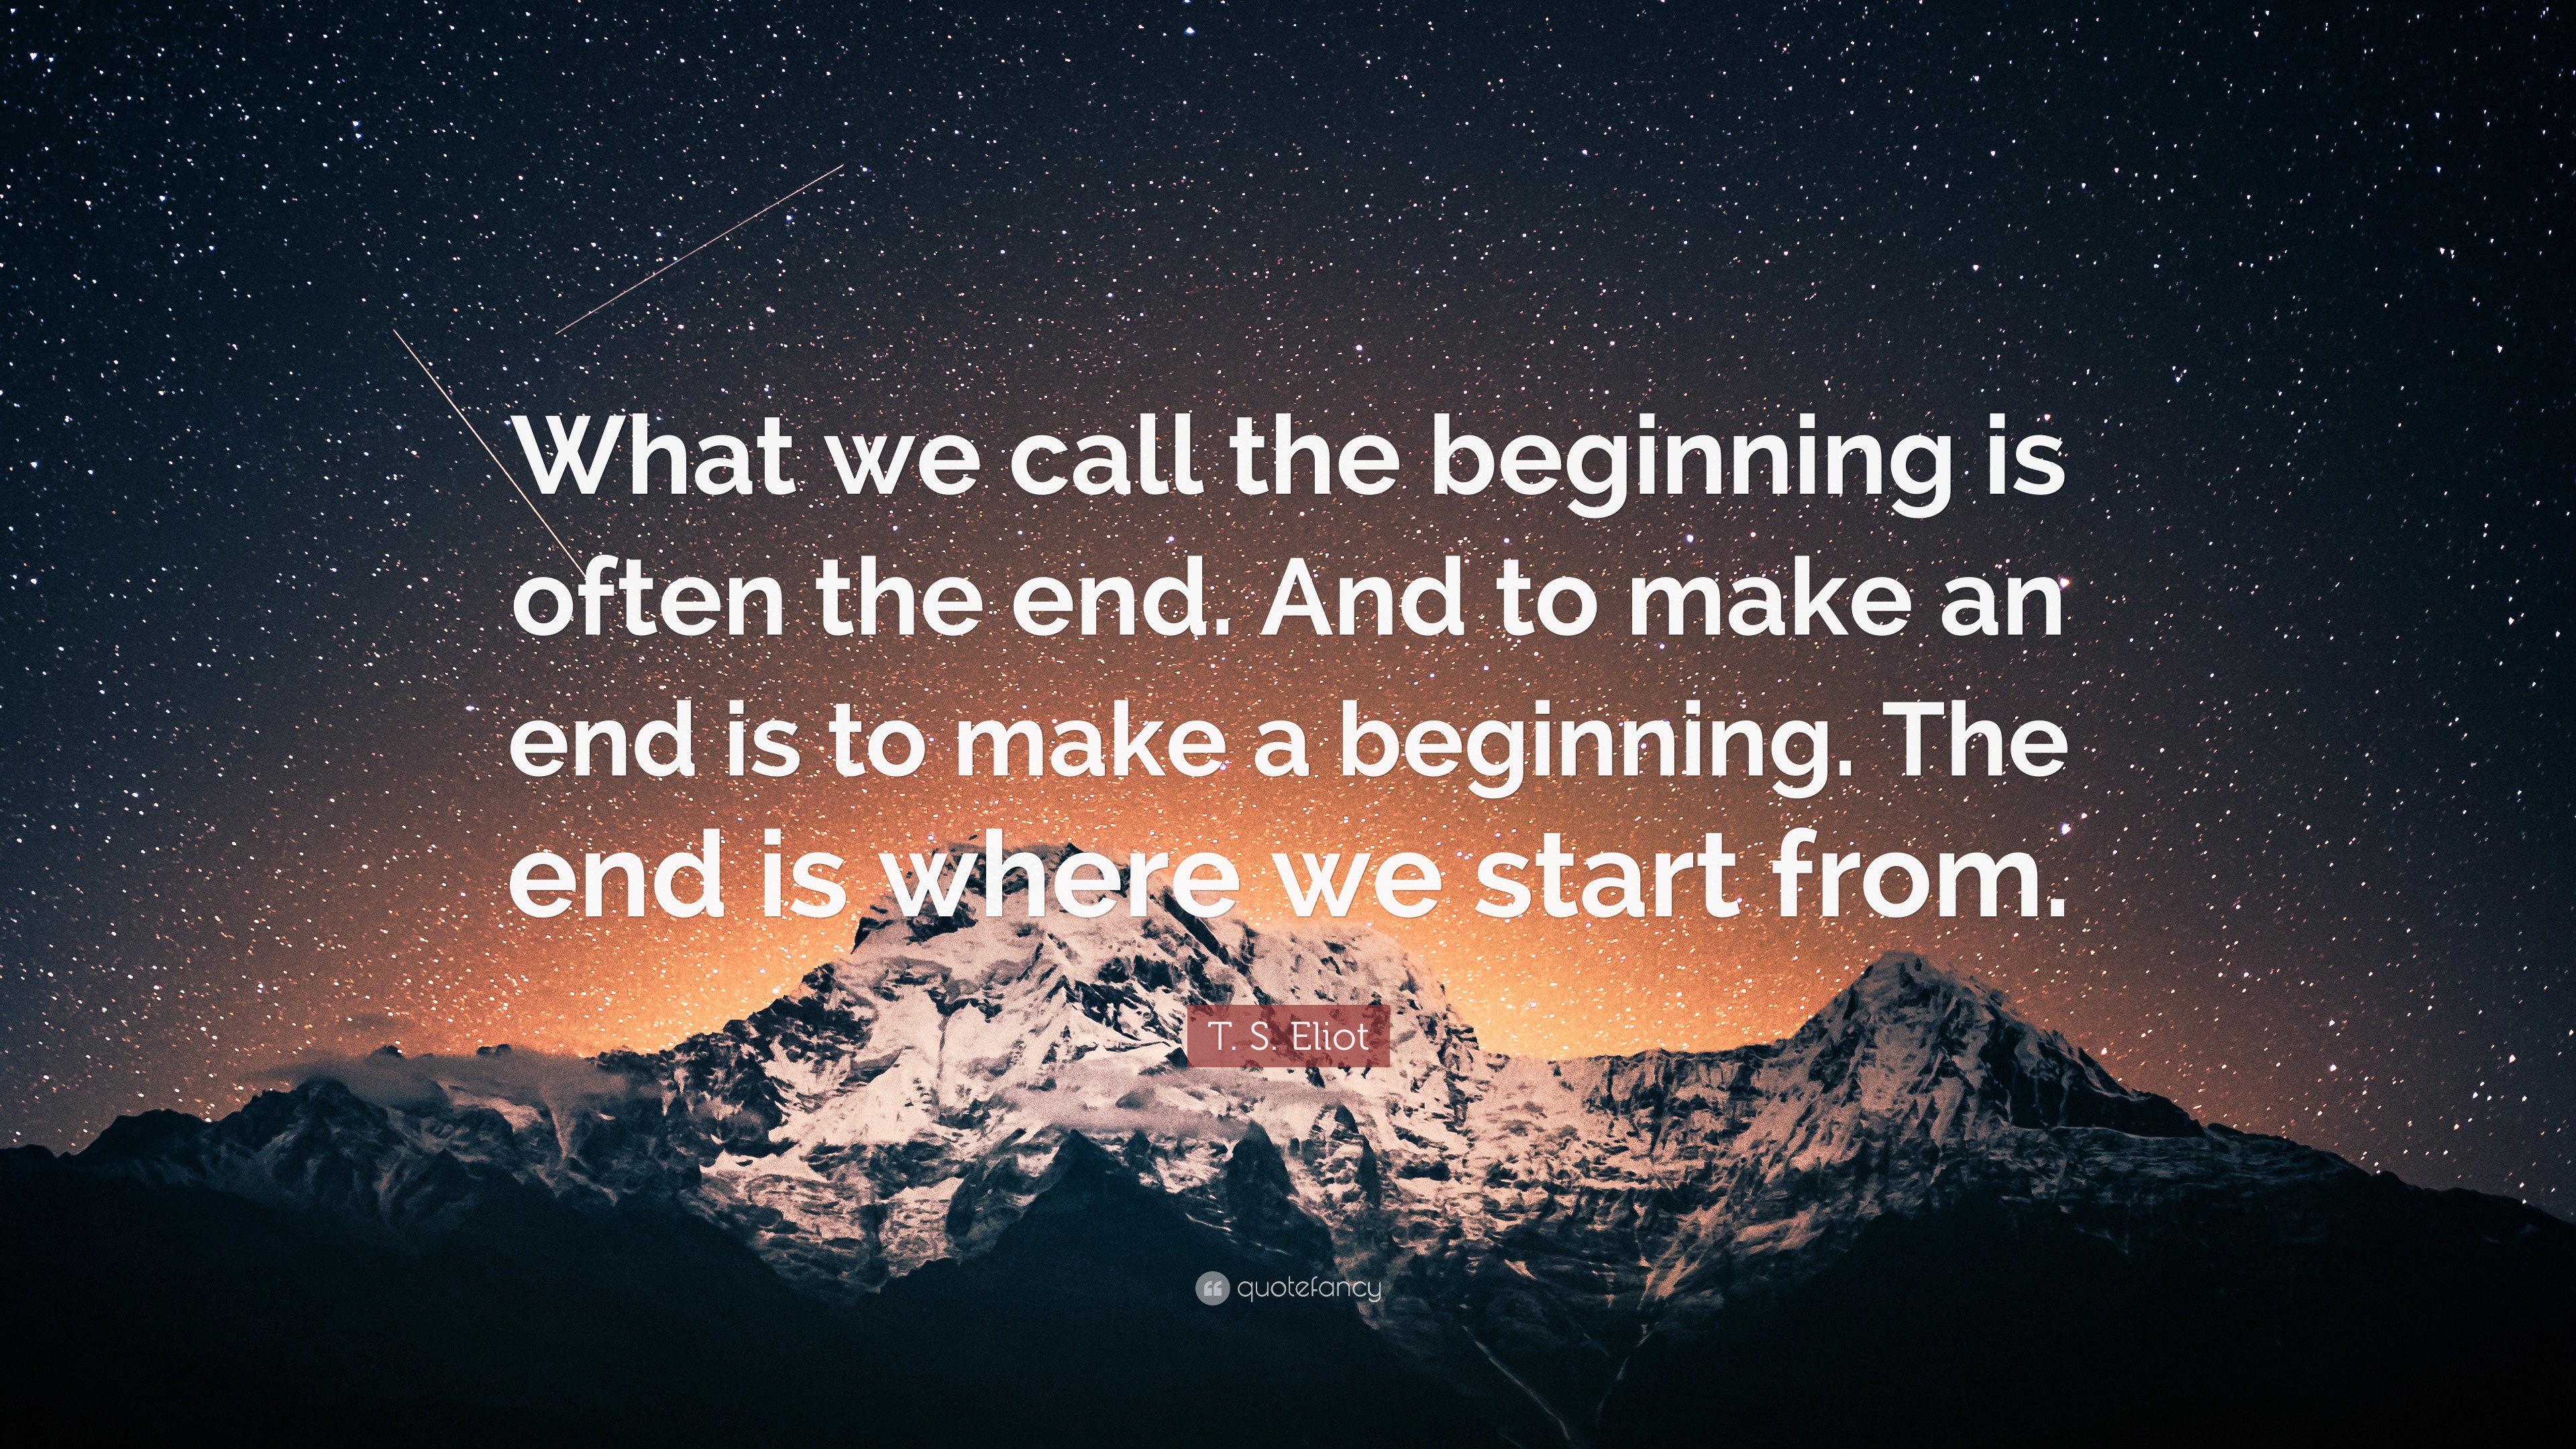 T. S. Eliot Quote: “What we call the beginning is often the end. And to